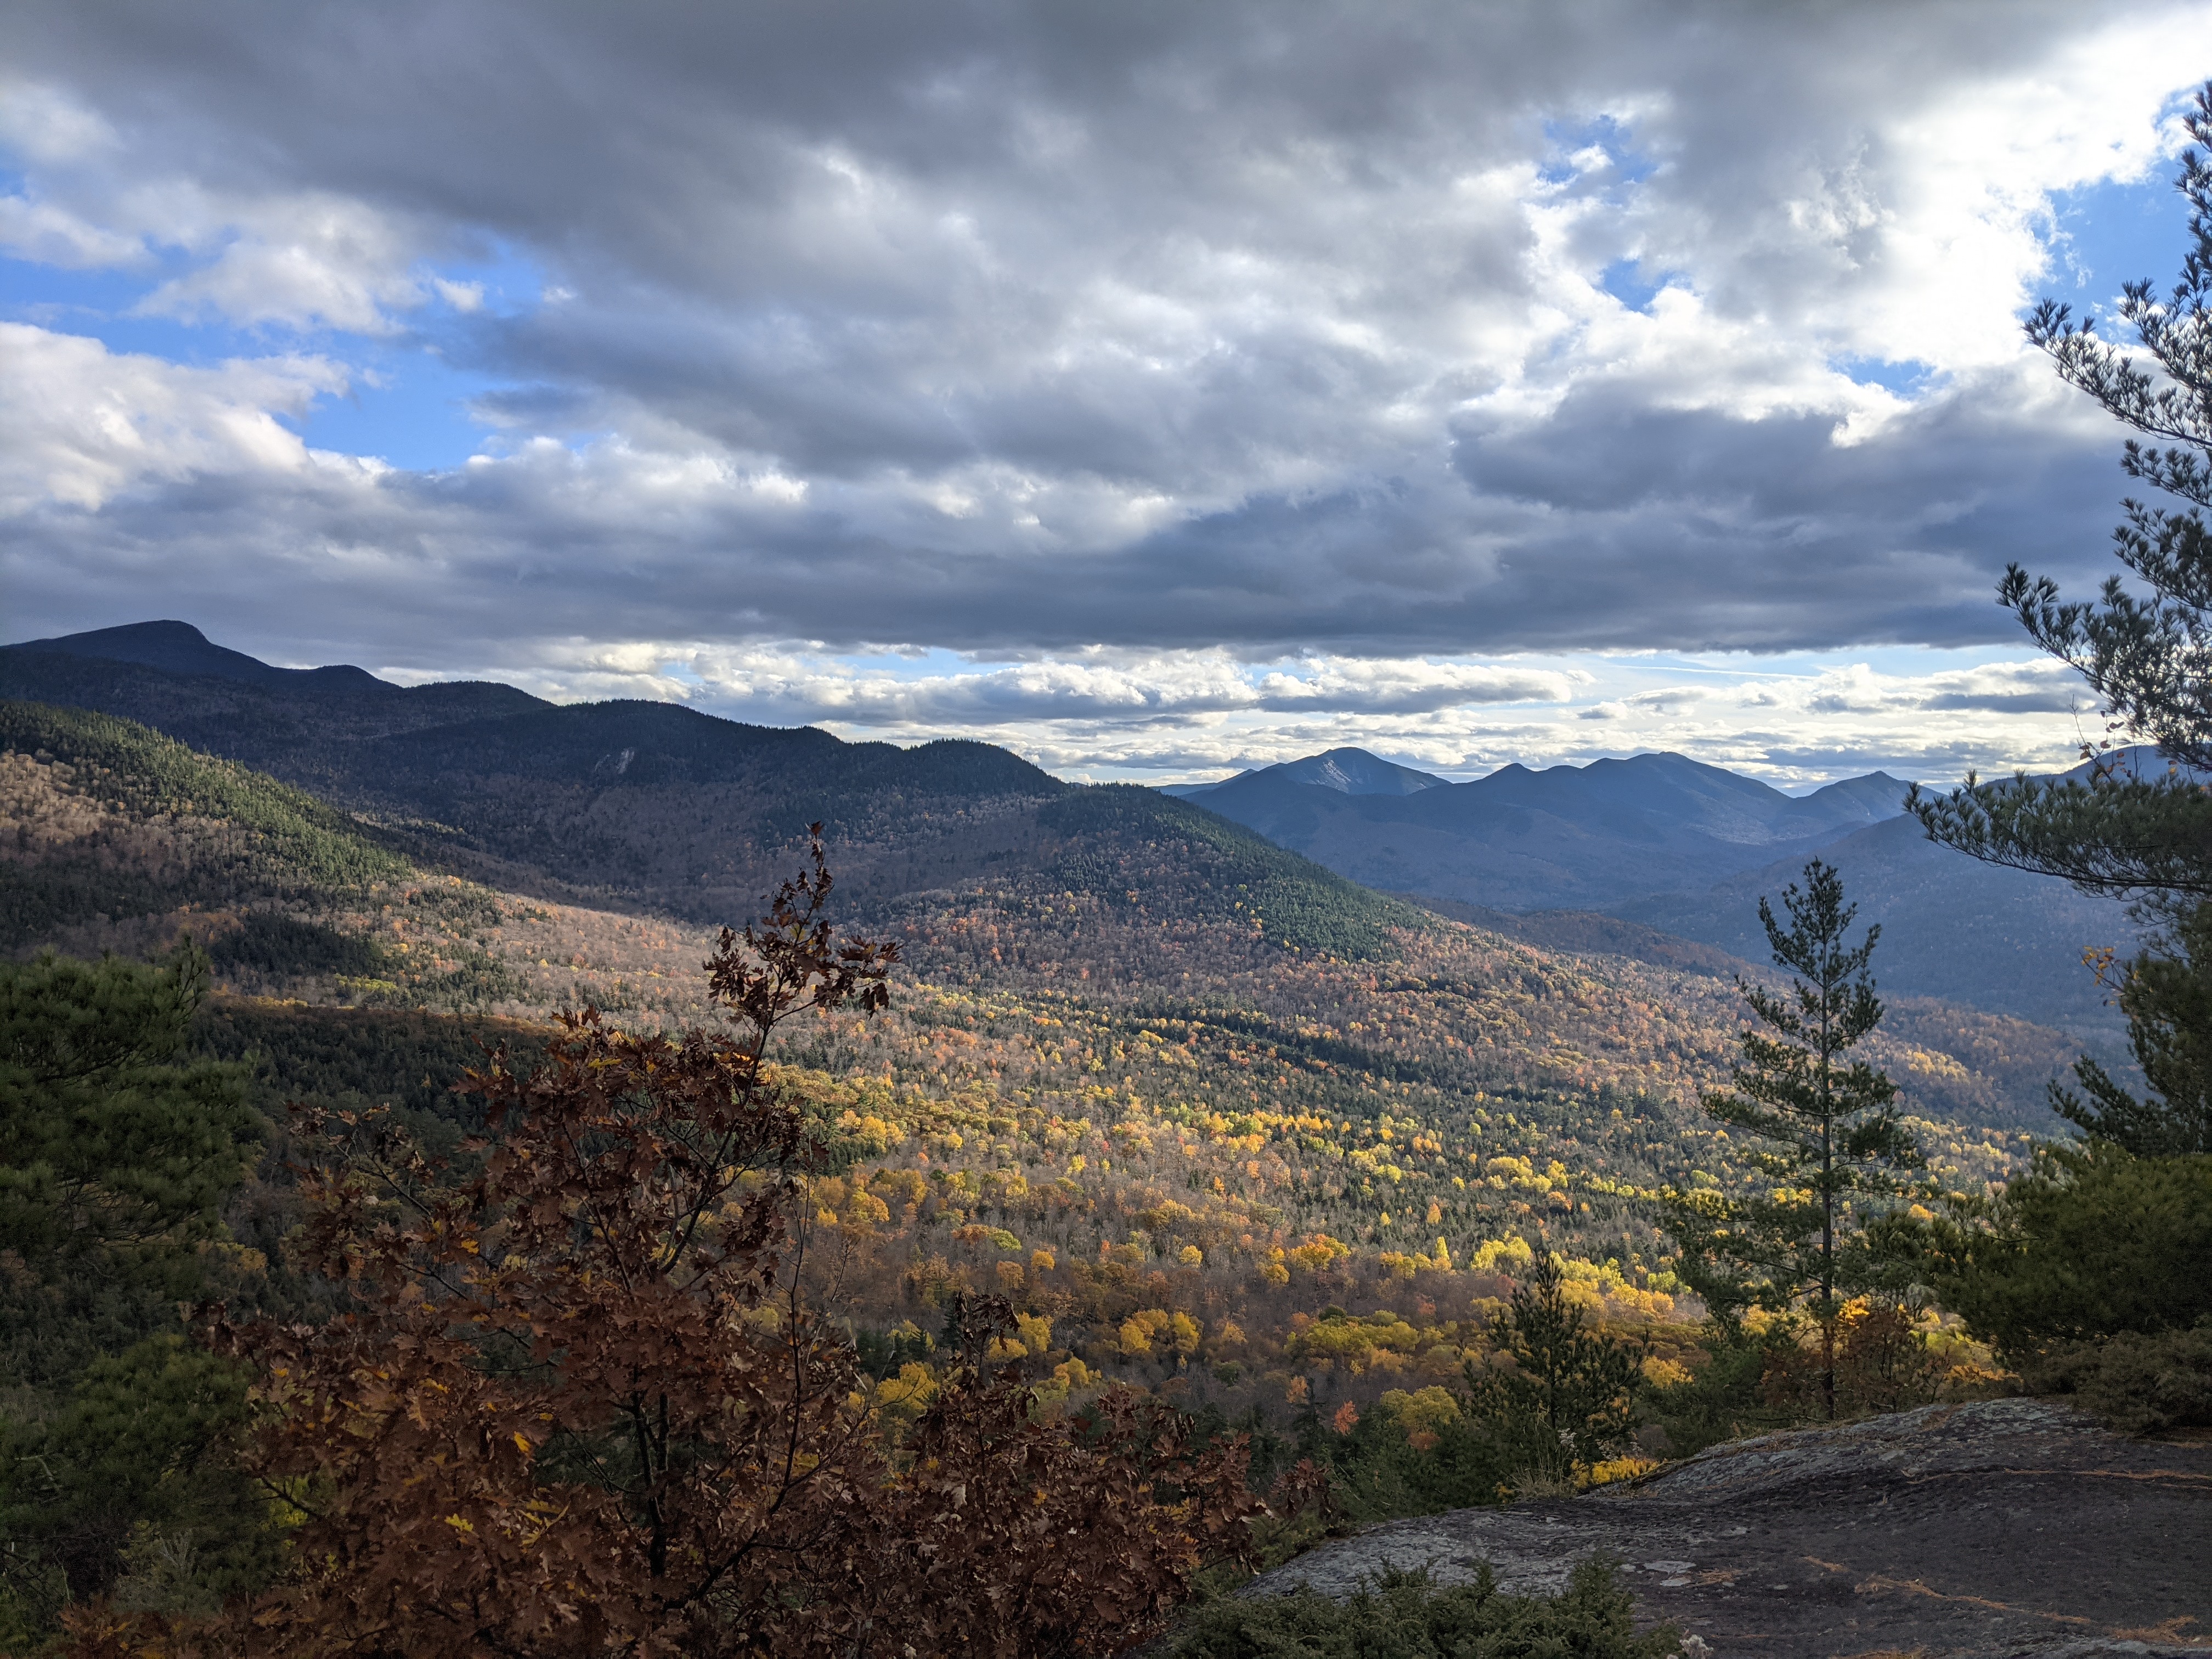 A view of fall foliage from the top of Baxter Mountain.